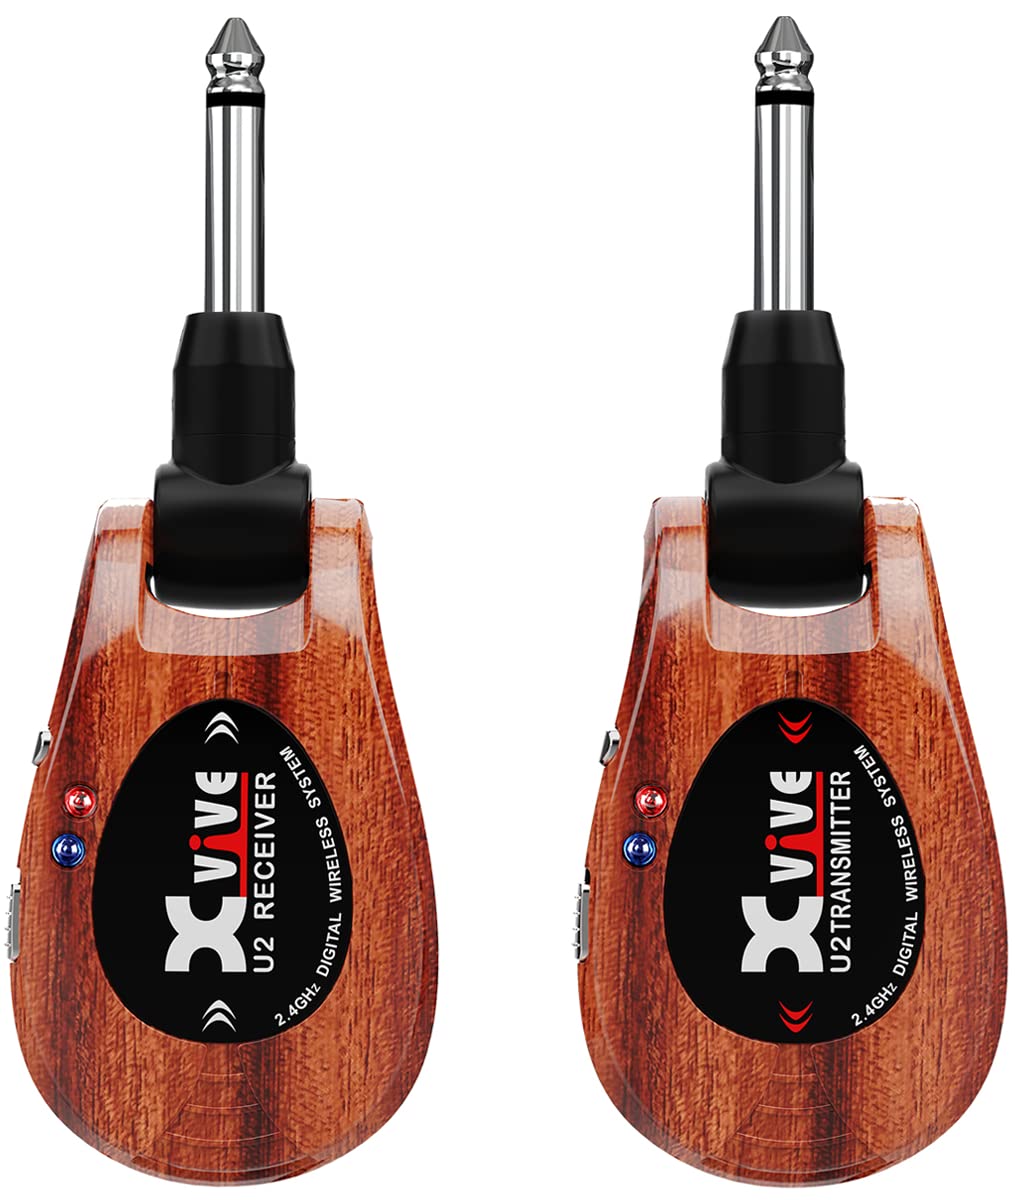 Xvive U2 Guitar Wireless System With Transmitter And Receiver For Electric Guitars, Amp, Bass, Violin (Wooden)